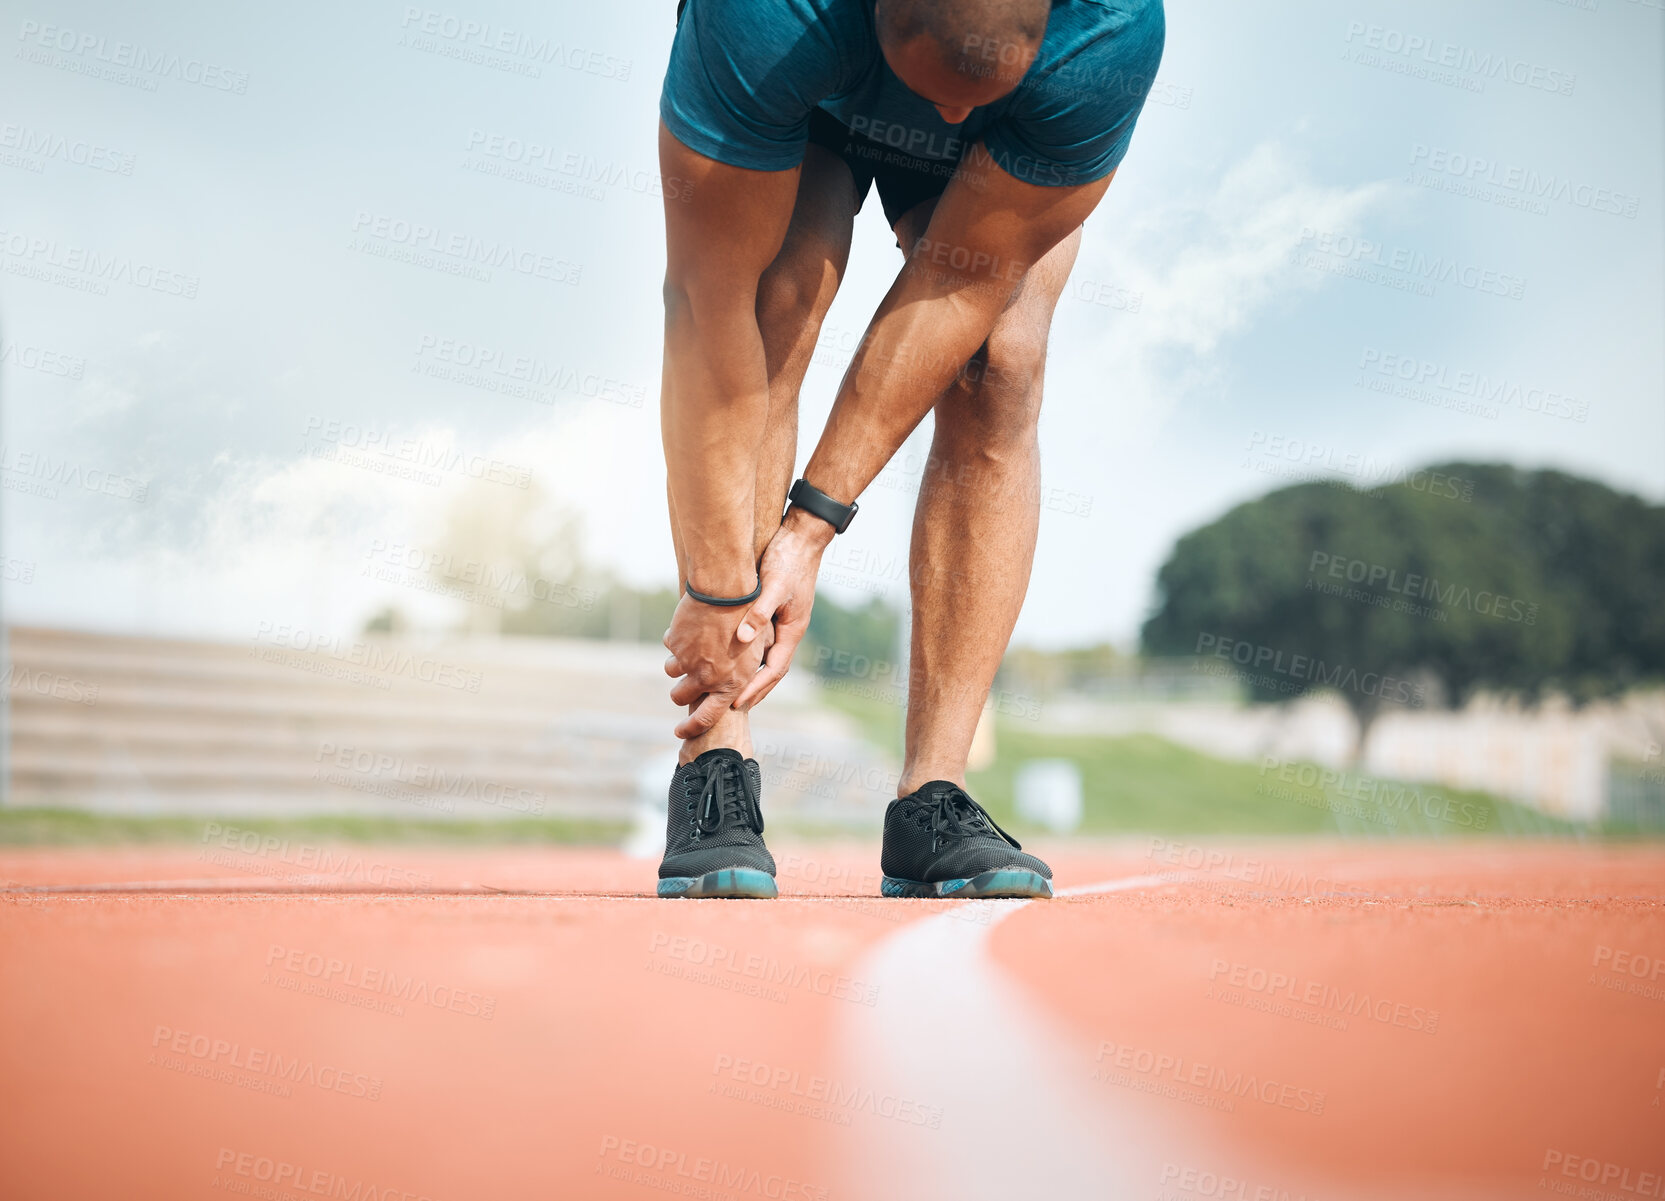 Buy stock photo Exercise, running and ankle pain with a sports person holding their leg closeup on a race track outdoor. Fitness, training and the legs of an athlete with a joint injury at a stadium or venue